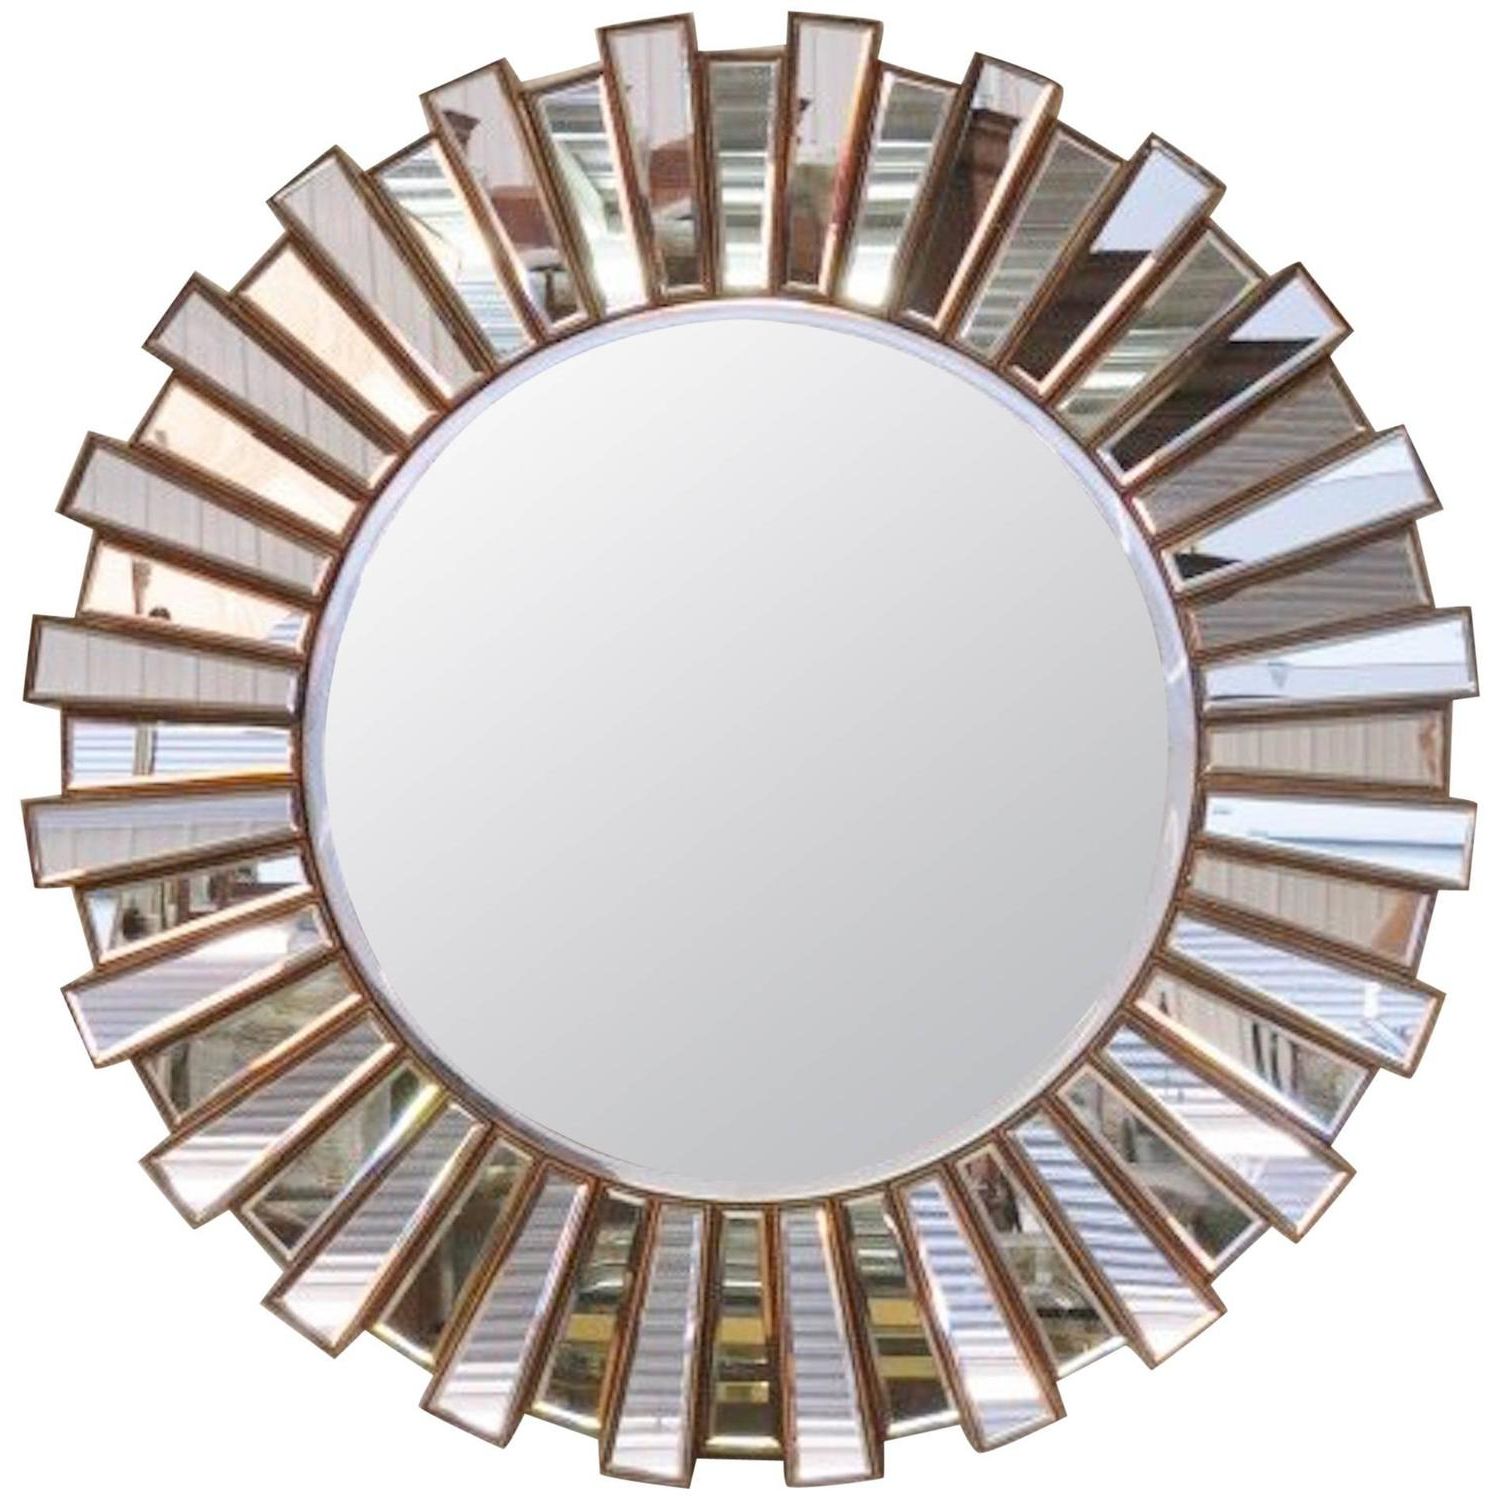 Sunburst Mirrored Wall Art For Well Liked Large Mirrored Sunburst Mirror At 1stdibs (View 3 of 15)